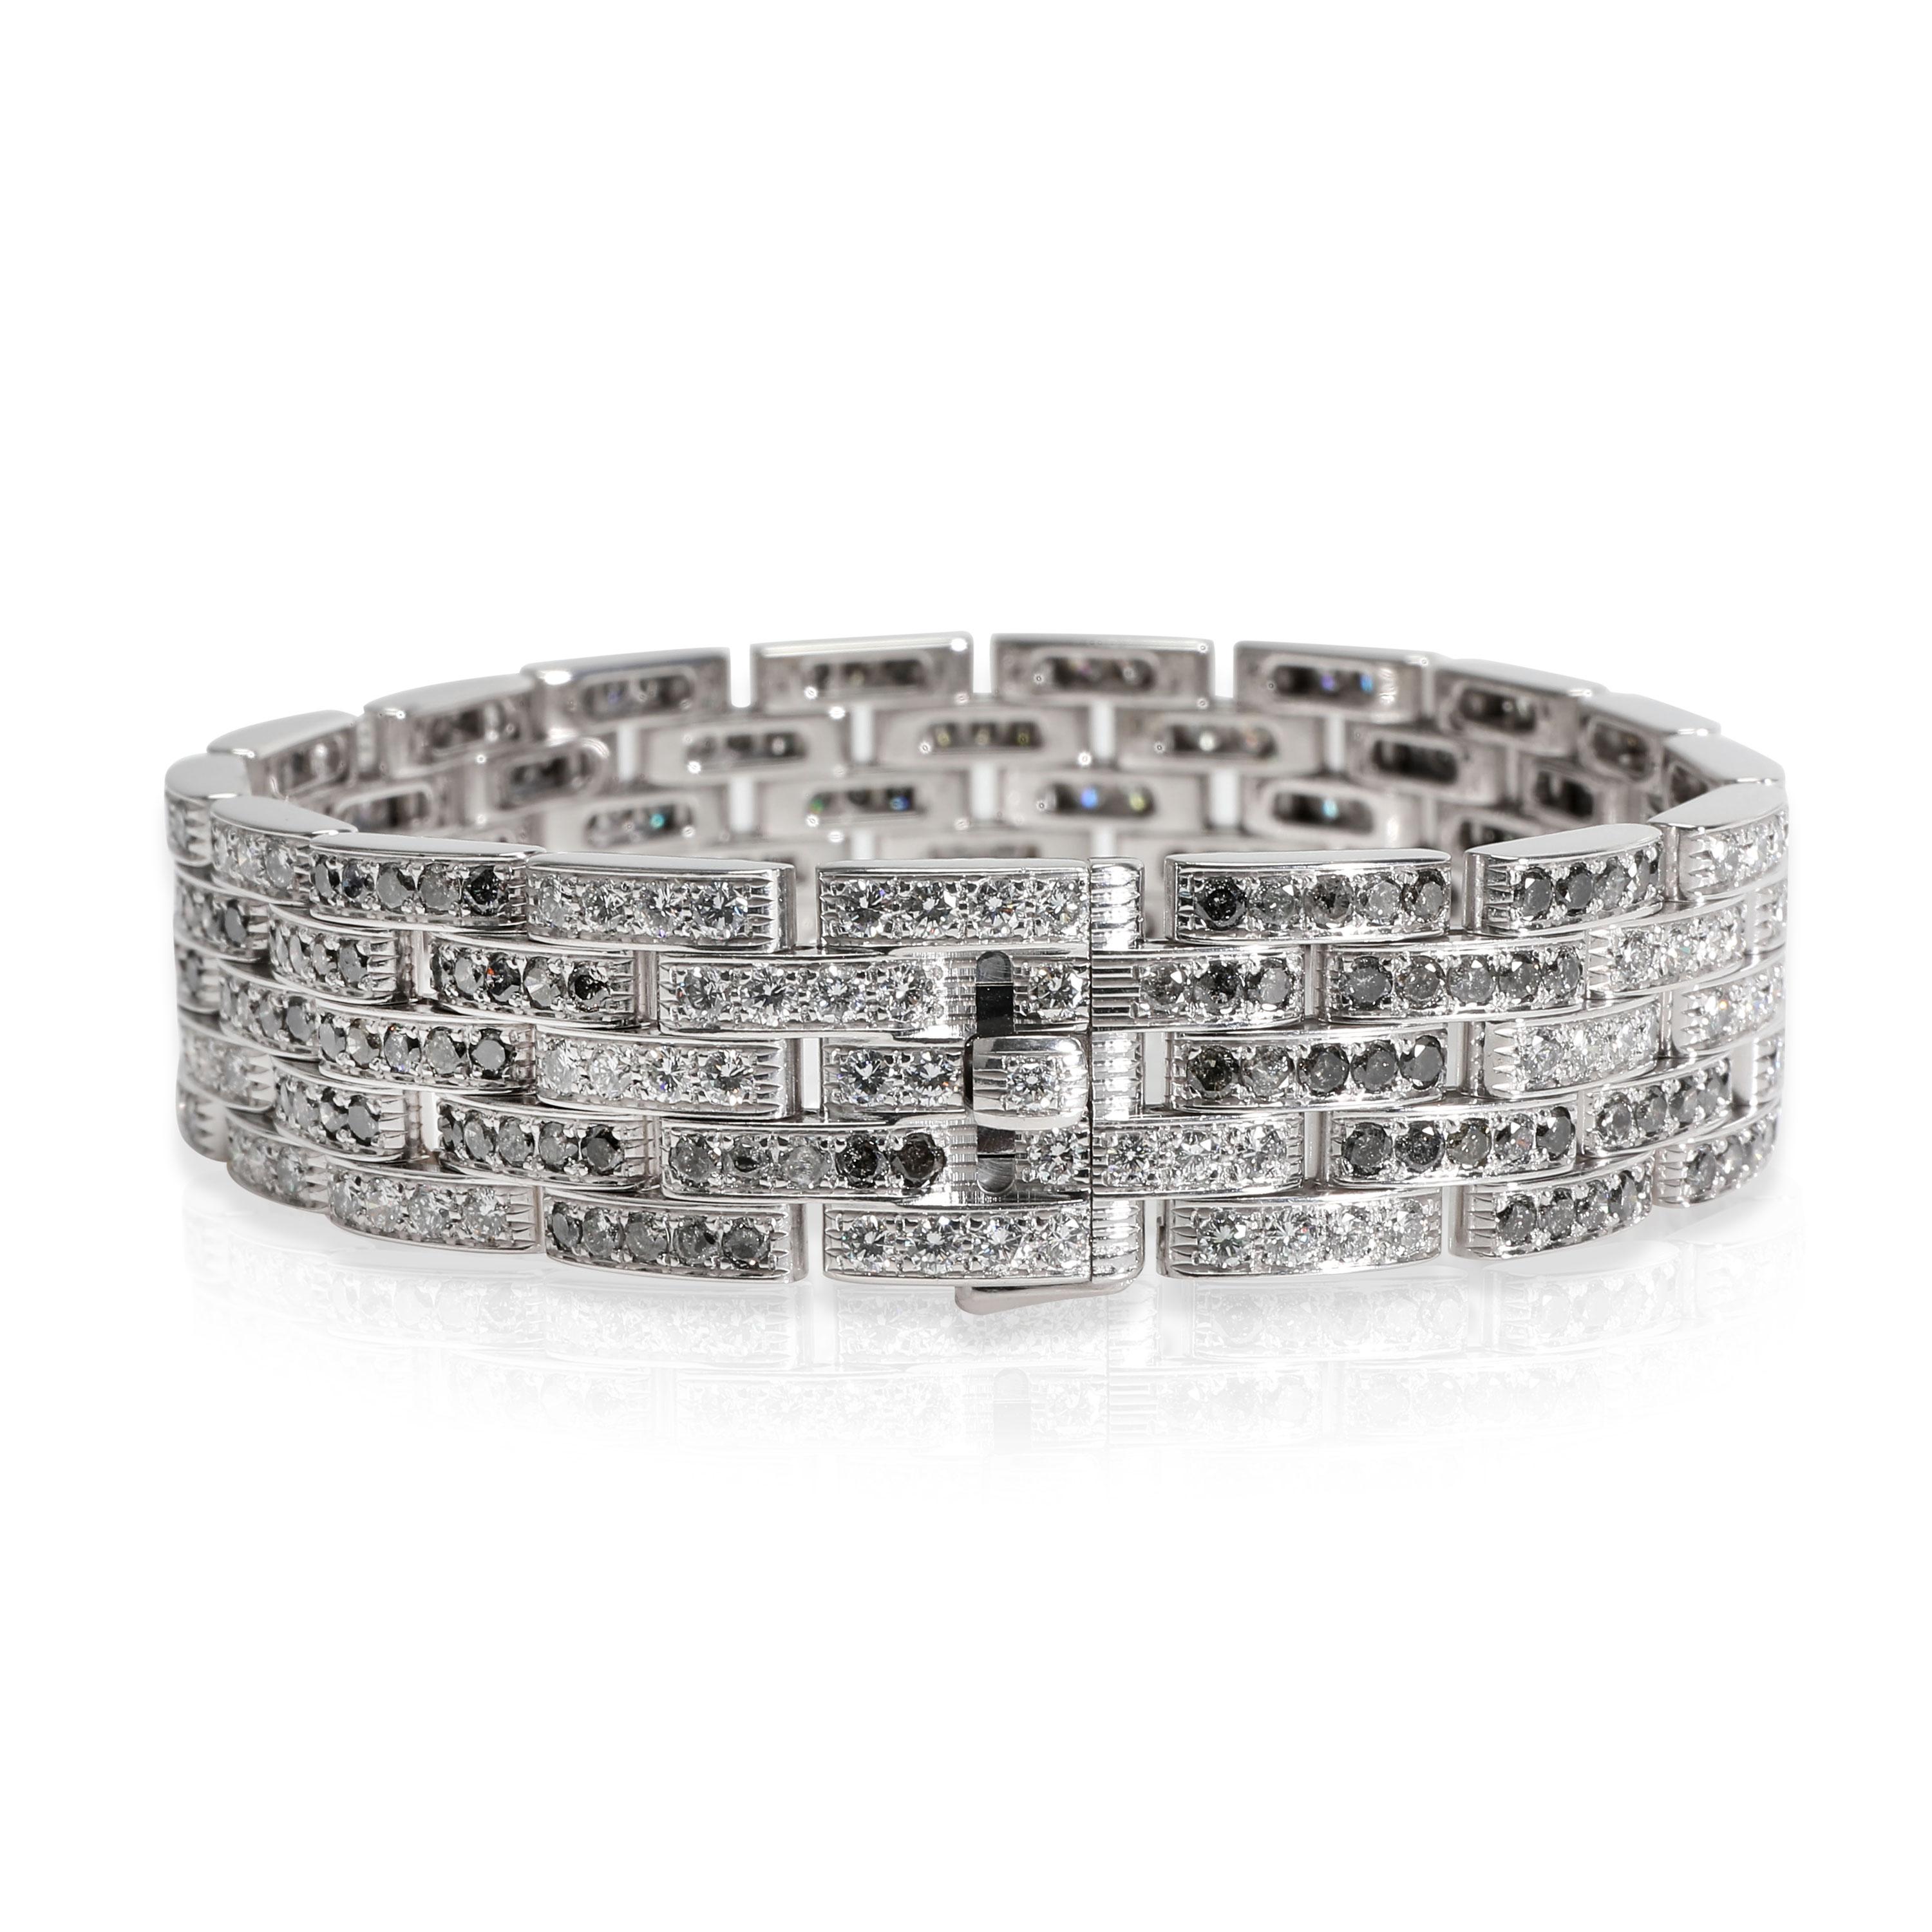 
Cartier Maillon Panthere Diamond Bracelet in 18K White Gold 10 CTW

PRIMARY DETAILS
SKU: 106179
Listing Title: Cartier Maillon Panthere Diamond Bracelet in 18K White Gold 10 CTW
Condition Description: Retails for 50,000 USD. In excellent condition